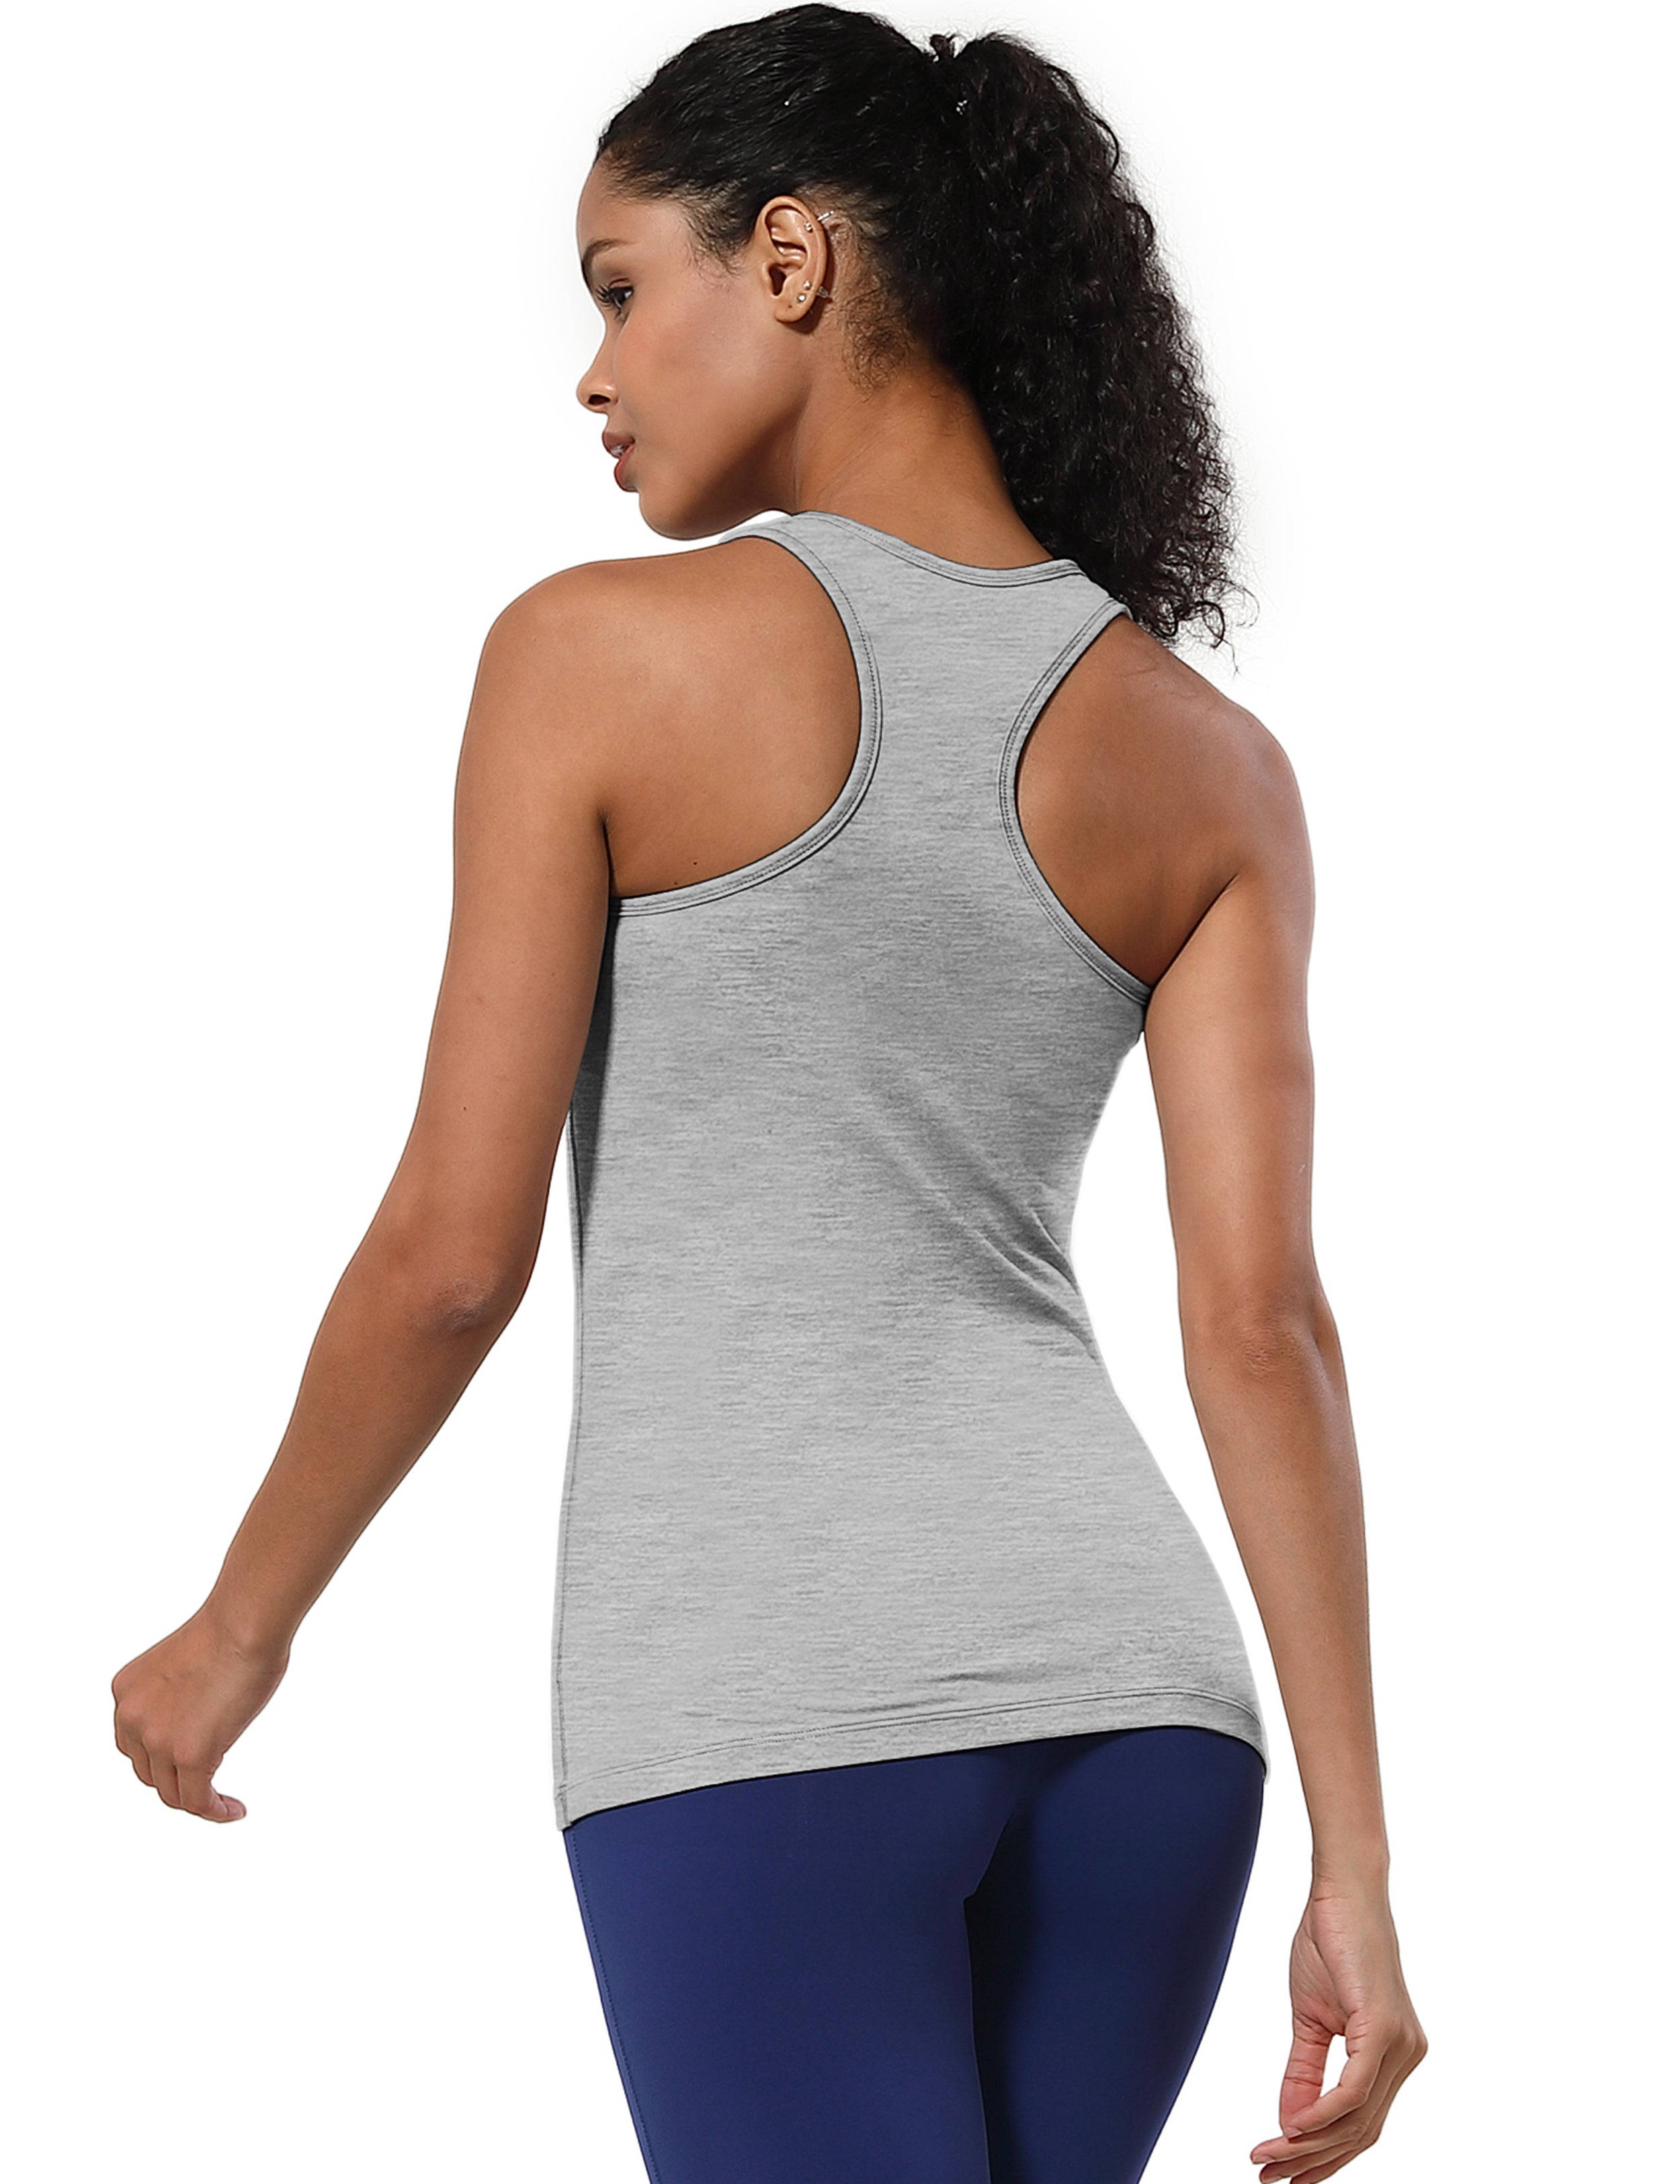 Racerback Athletic Tank Tops heathergray 92%Nylon/8%Spandex(Cotton Soft) Designed for Tall Size Tight Fit So buttery soft, it feels weightless Sweat-wicking Four-way stretch Breathable Contours your body Sits below the waistband for moderate, everyday coverage